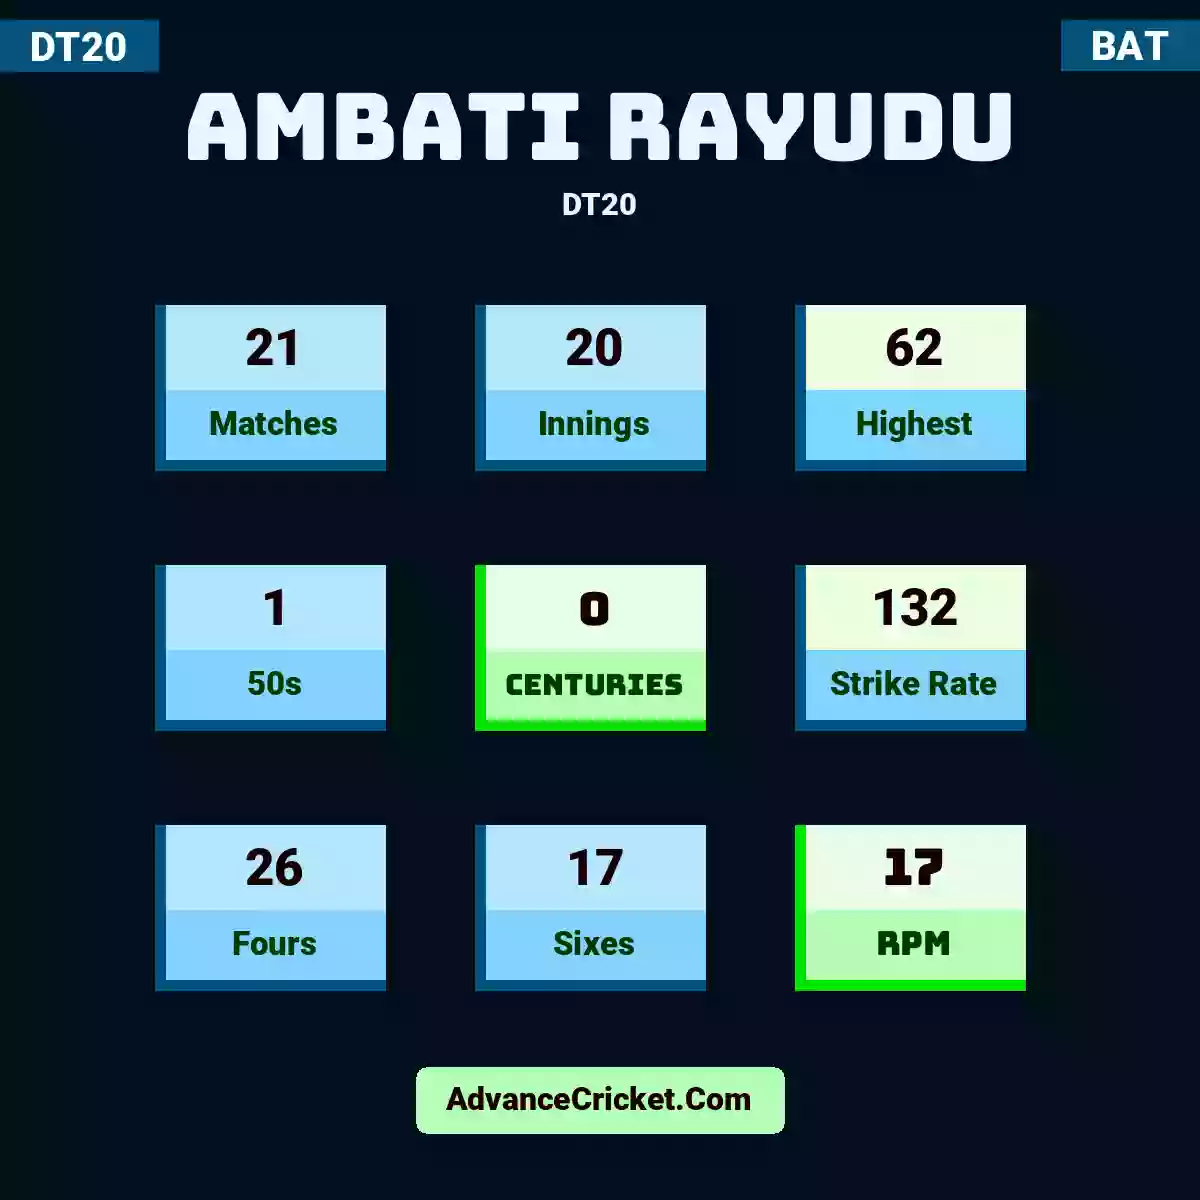 Ambati Rayudu DT20 , Ambati Rayudu played 21 matches, scored 62 runs as highest, 1 half-centuries, and 0 centuries, with a strike rate of 132. A.Rayudu hit 26 fours and 17 sixes, with an RPM of 17.